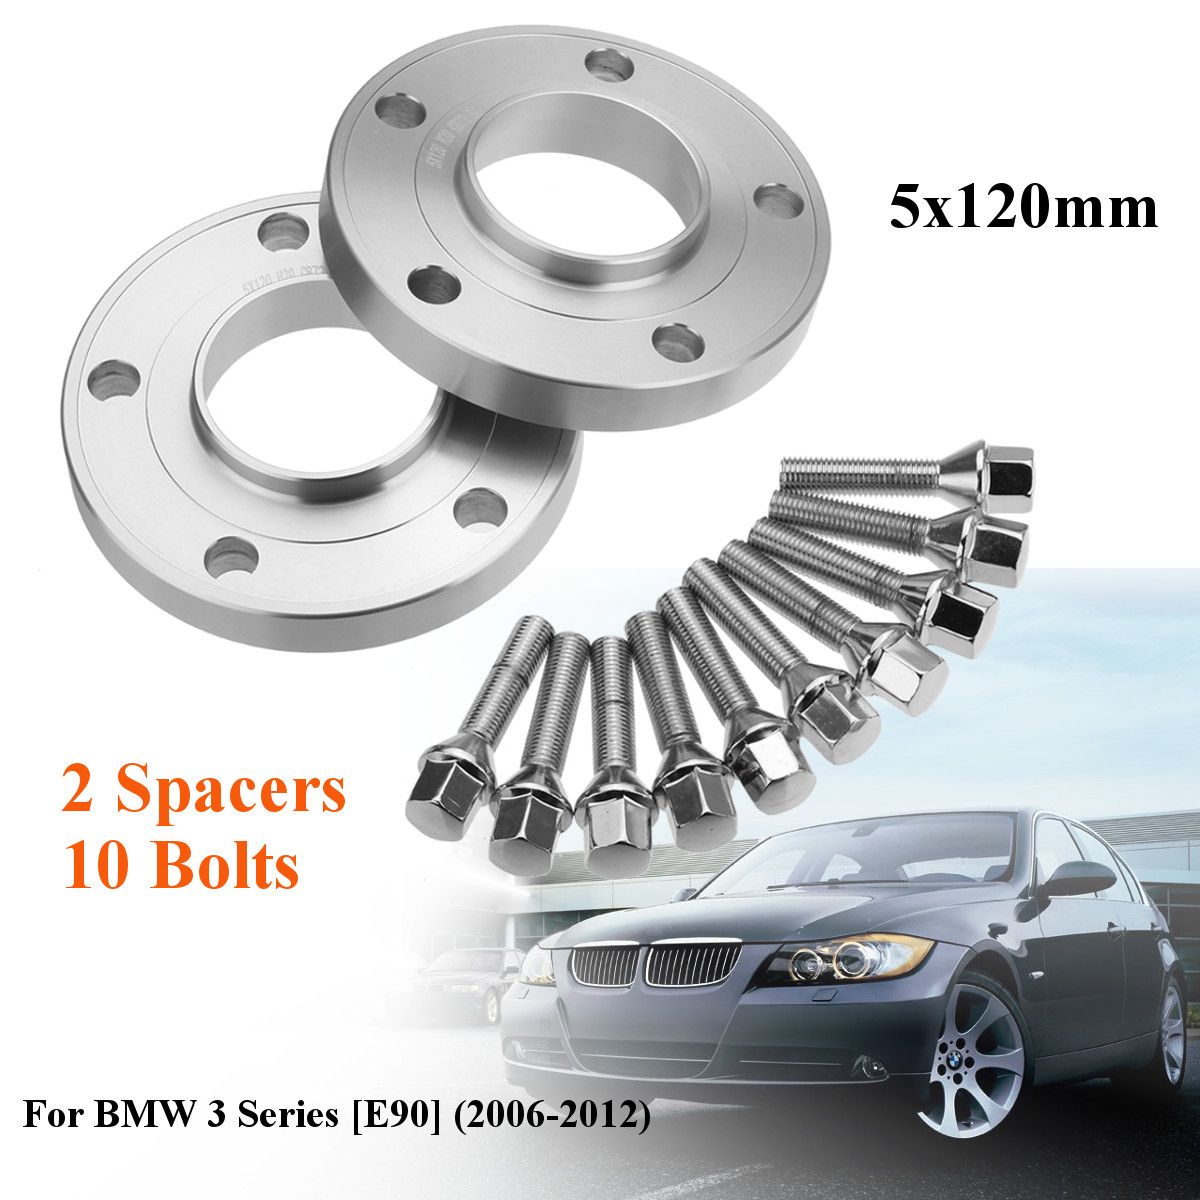 5x120mm-Wheel-Spacer-Hubcentric-Kit-w-Blot-Alloy-For-BMW-3-Series-E90-2006-2012-1260400